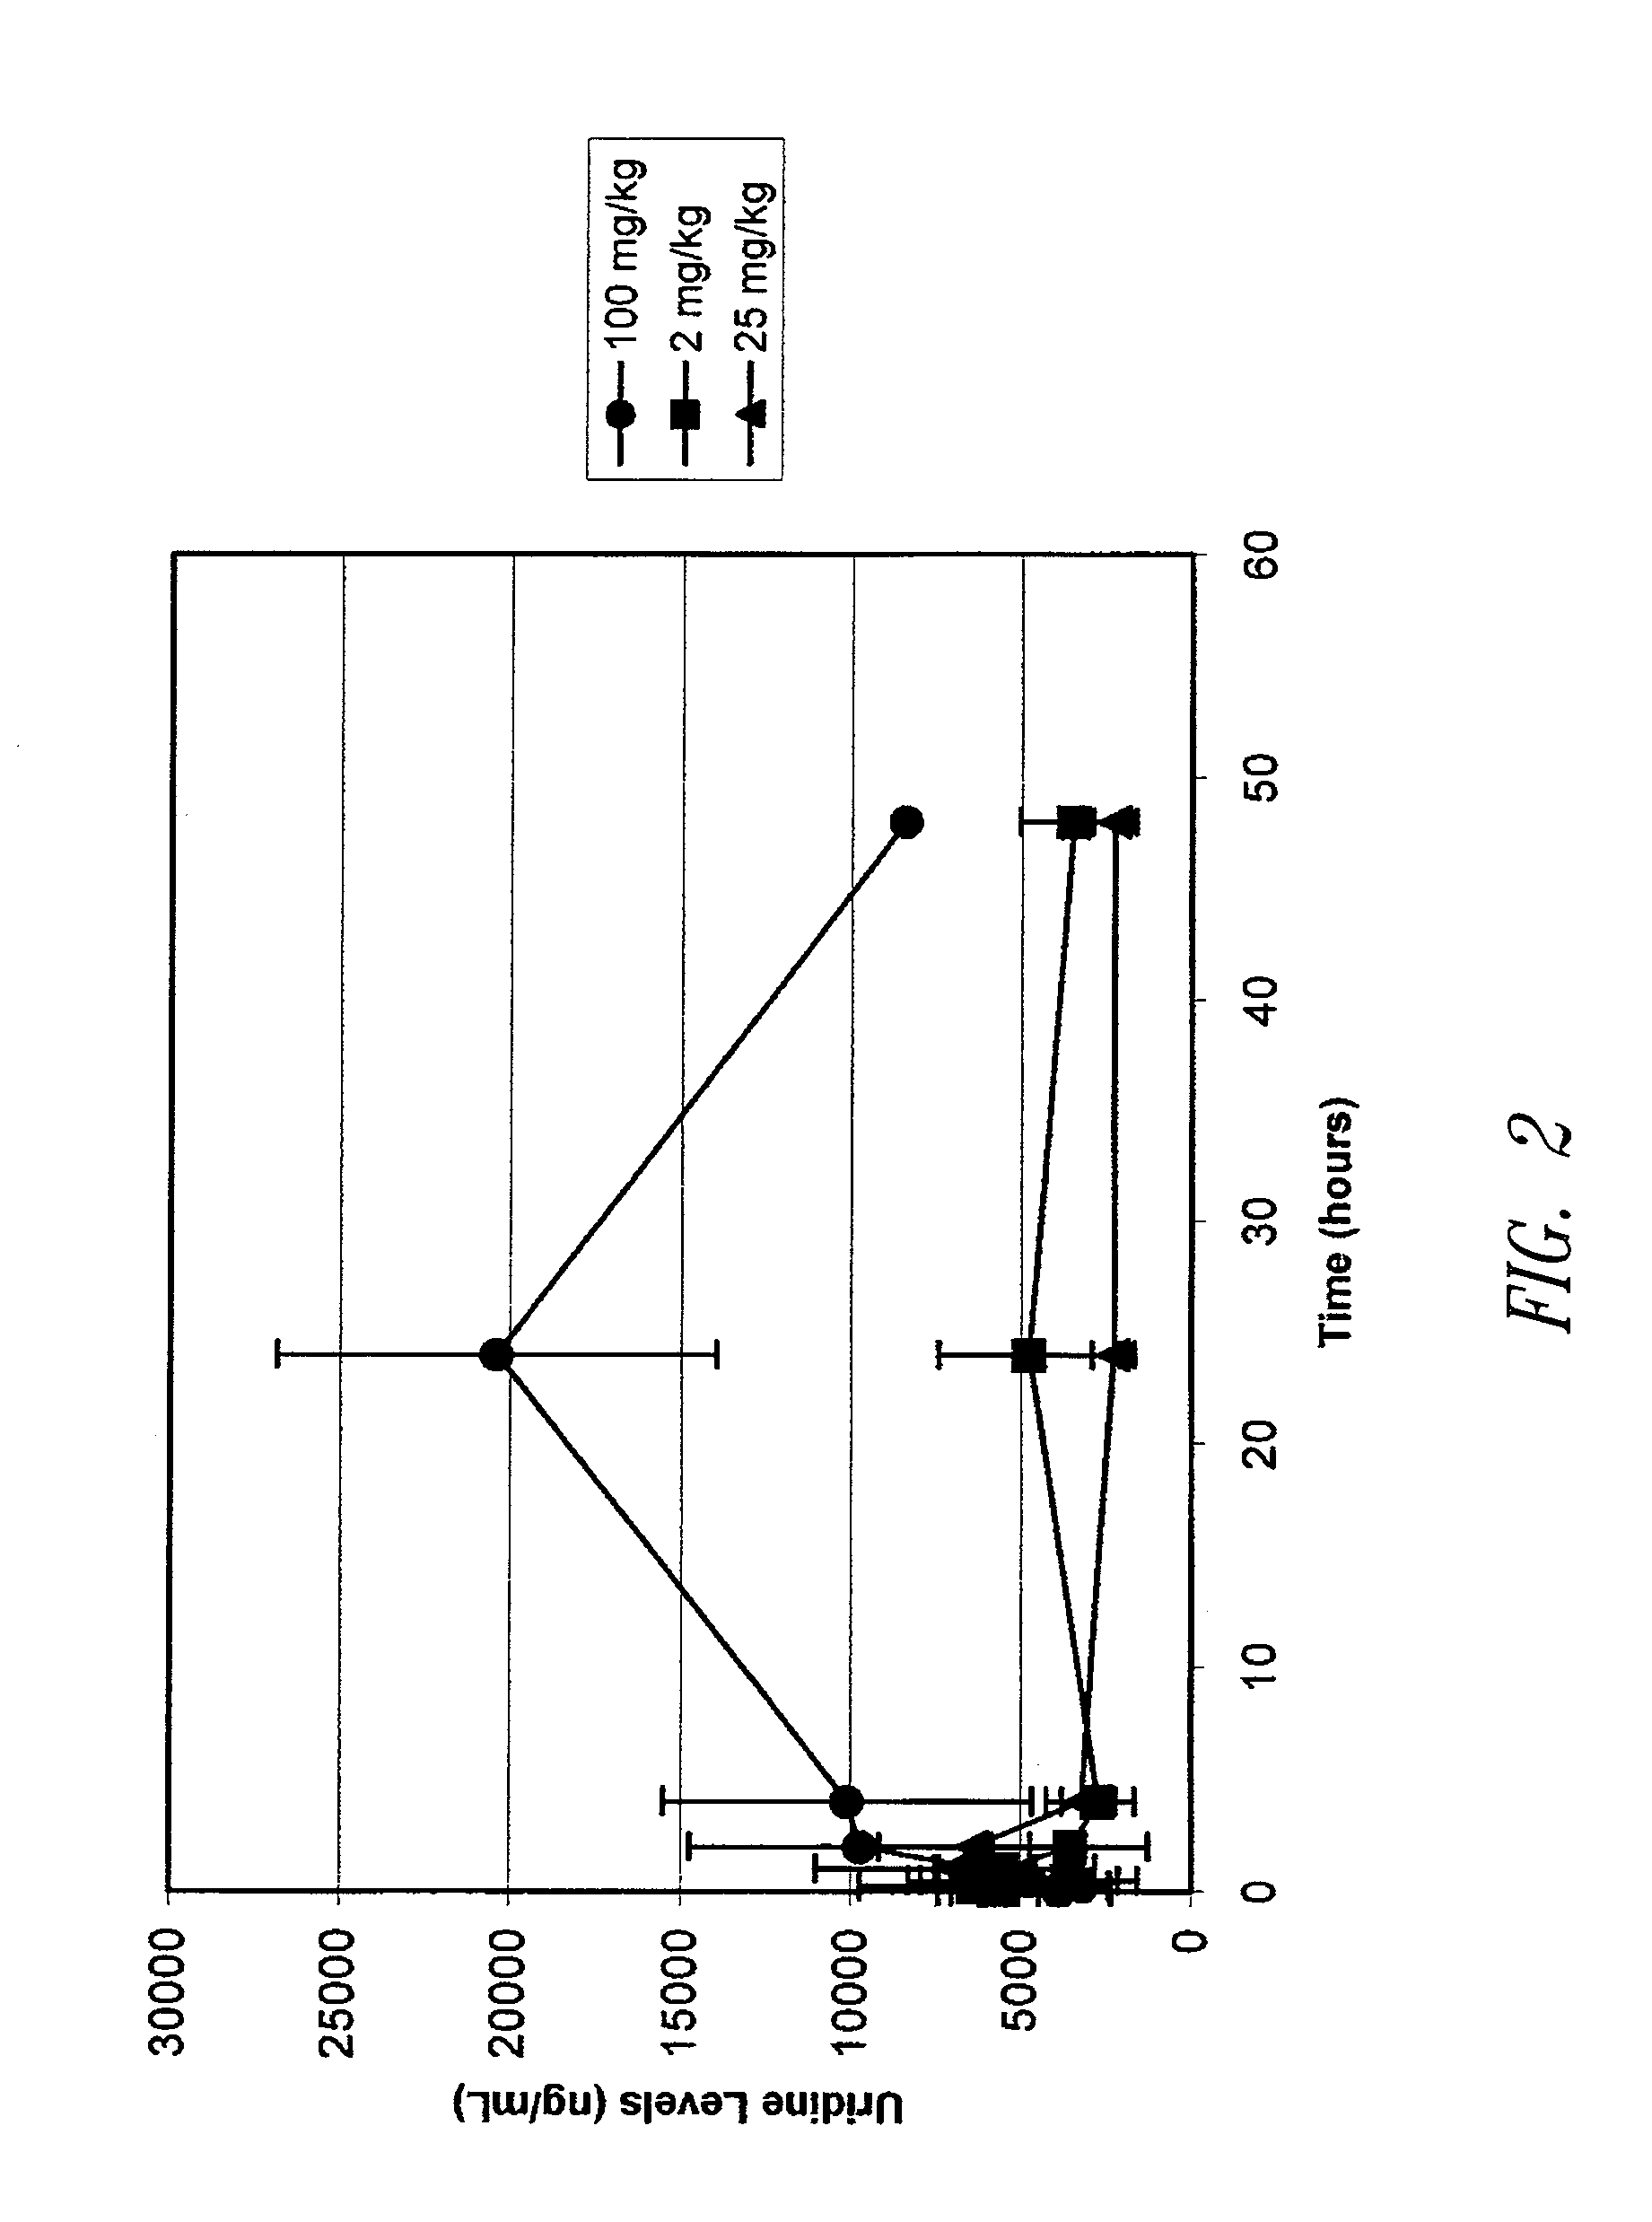 Methods for administering dpd inhibitors in combination with 5-fu and 5-fu prodrugs